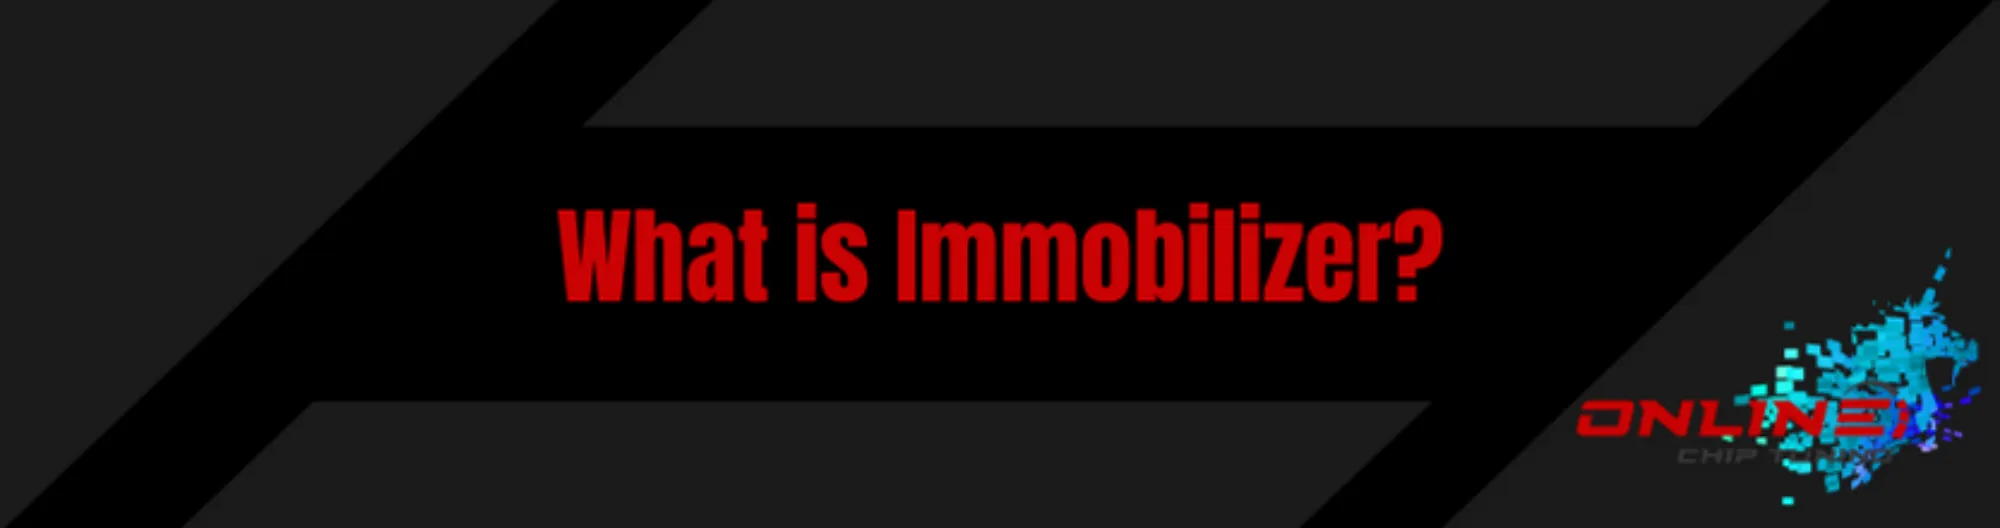 What is Immobilizer?